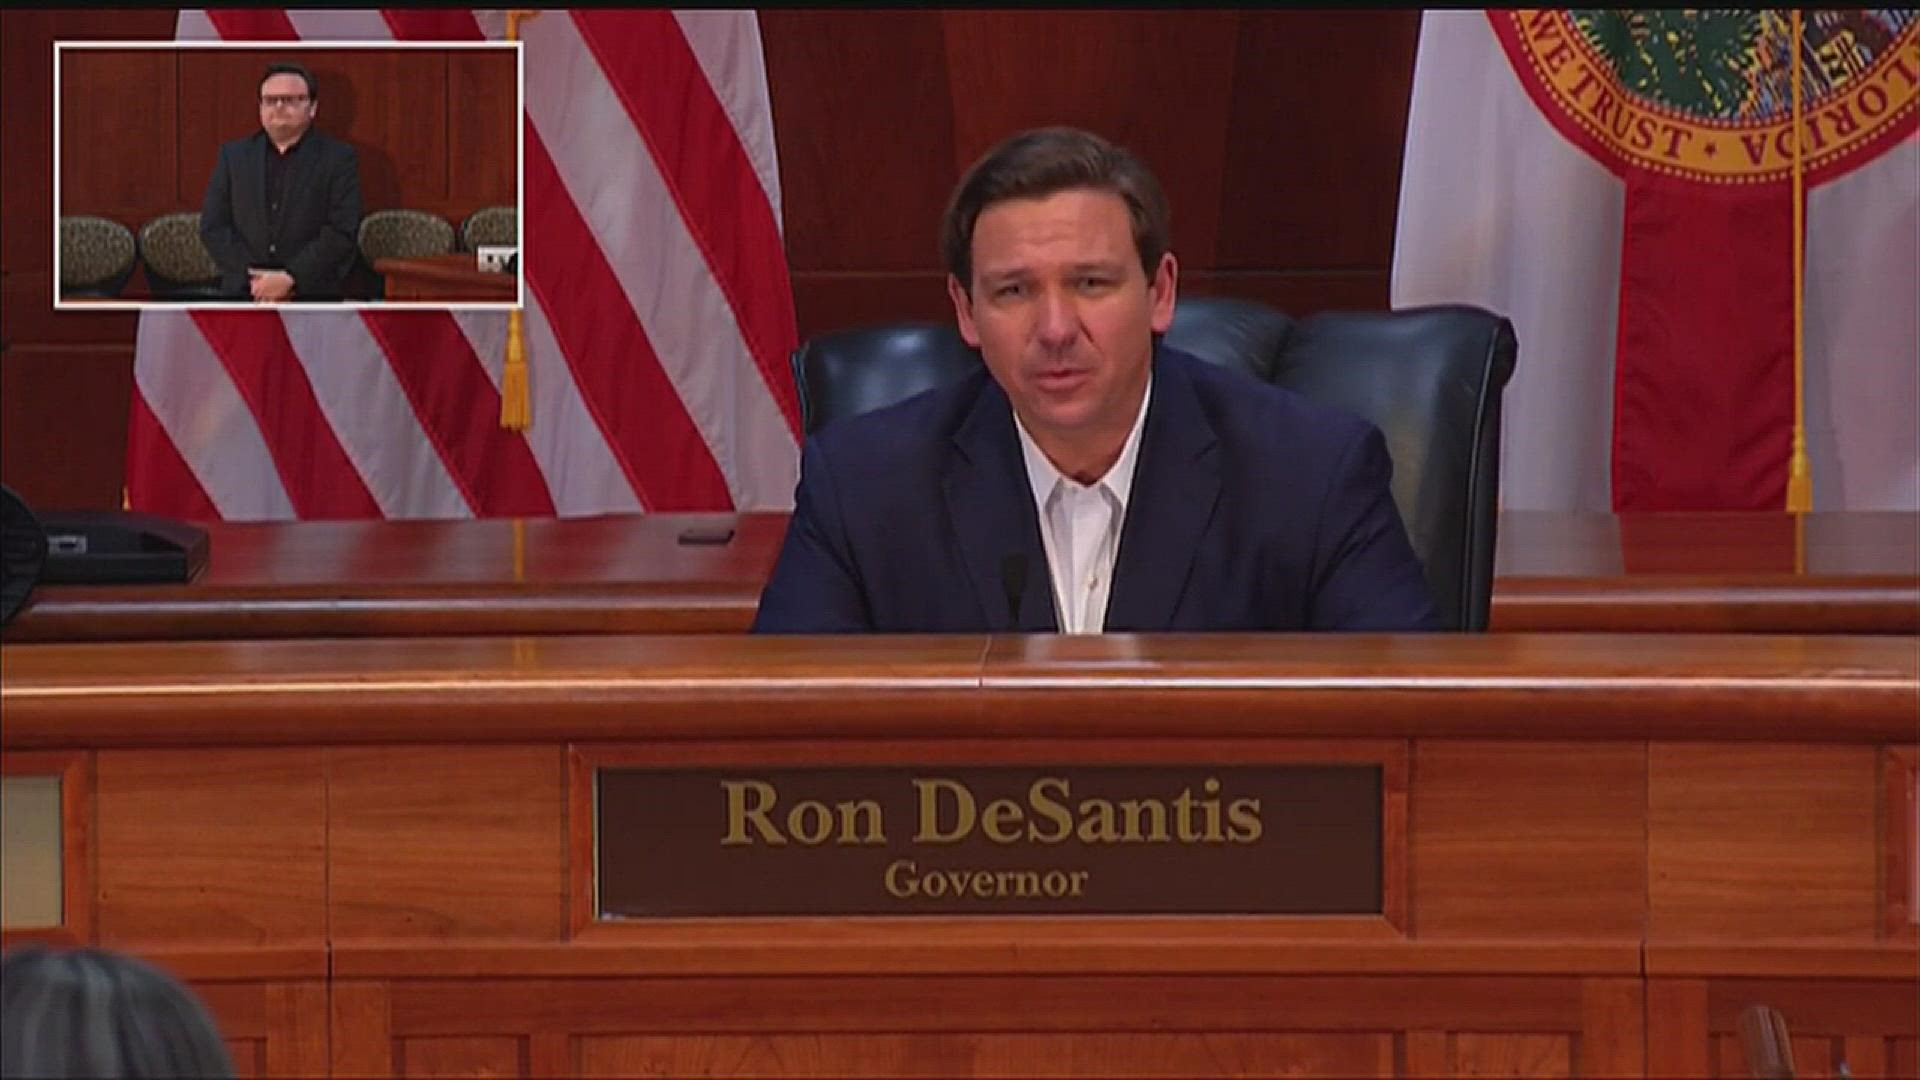 Gov. Desantis issued an Executive Order to identify and deploy agencies and state government employees to assist with the unemployment operations.